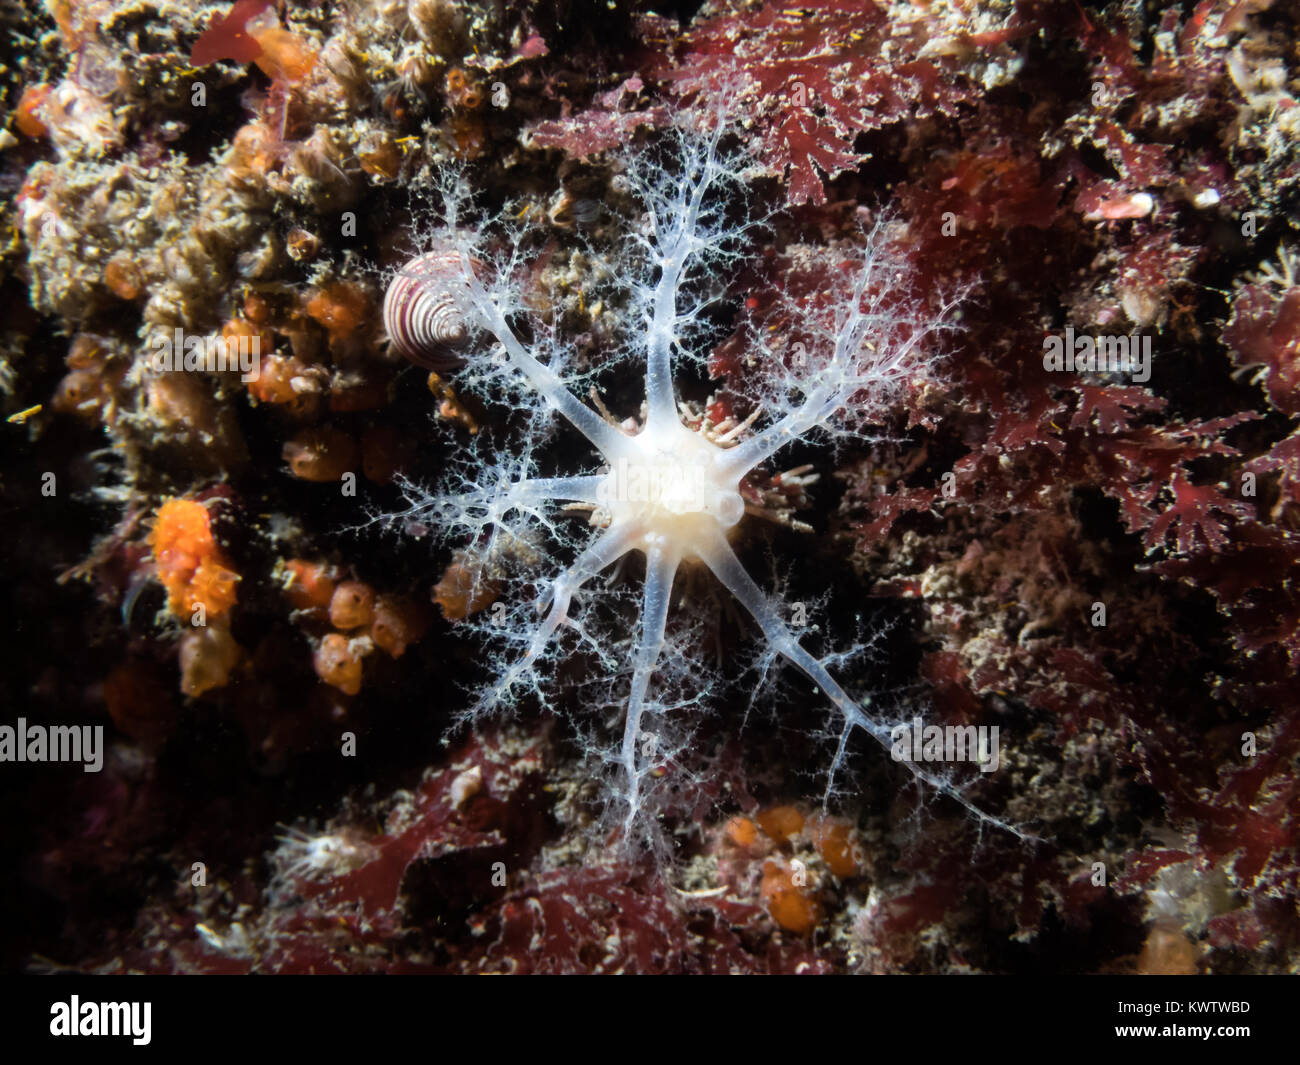 A brilliant white Pale Sea Cucumber photographed at a depth of 70 ft. in Southern British Columbia. Stock Photo